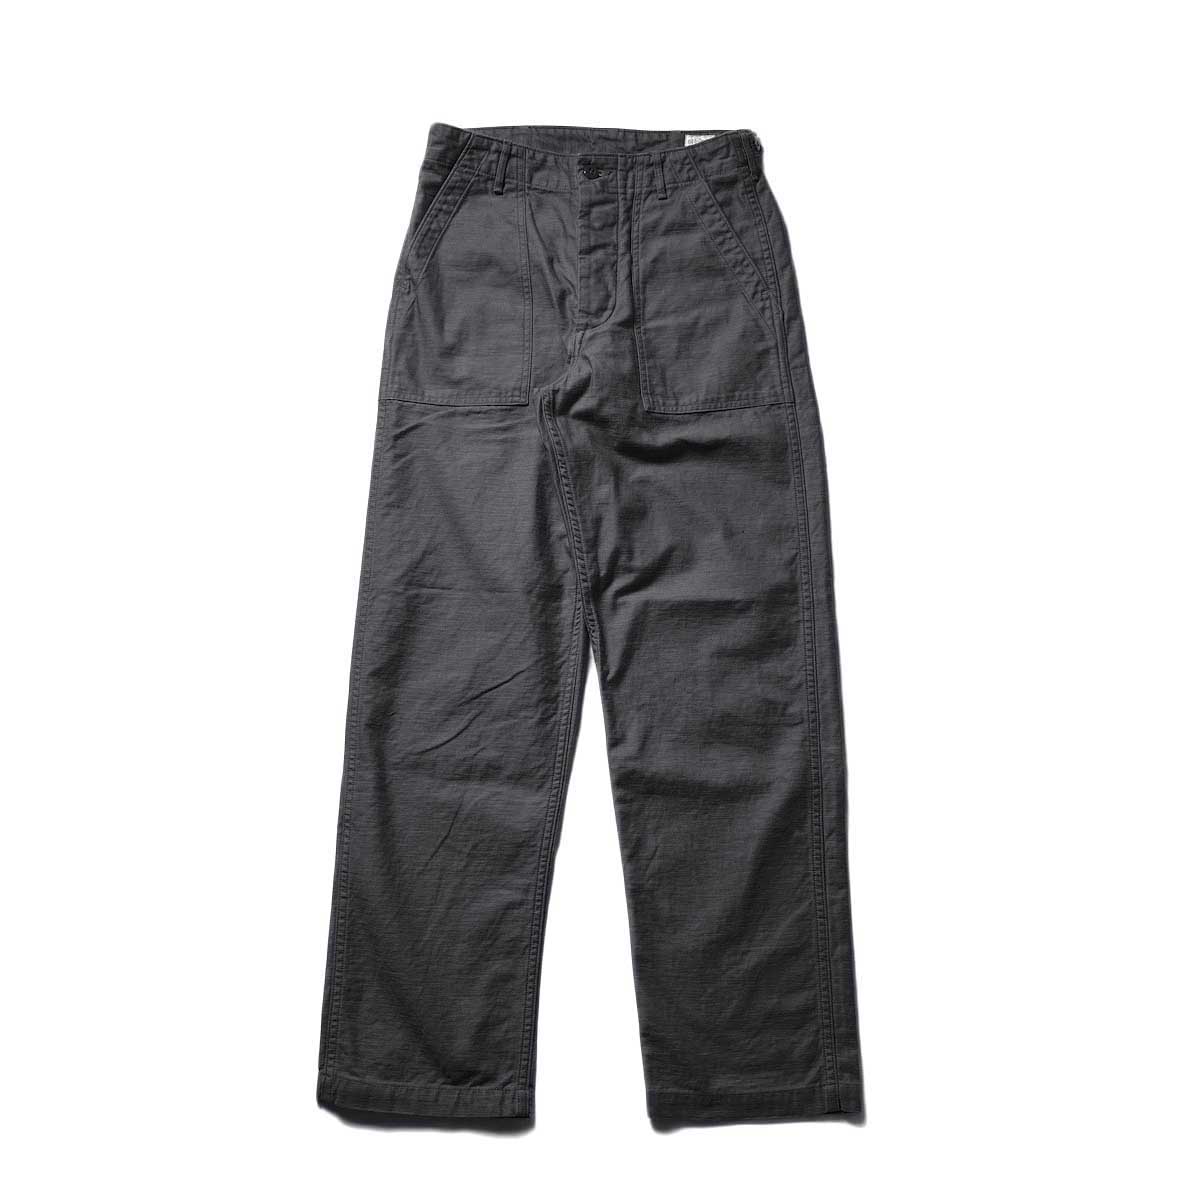 orSlow / US ARMY FATIGUE PANTS (BLACK STONE)正面